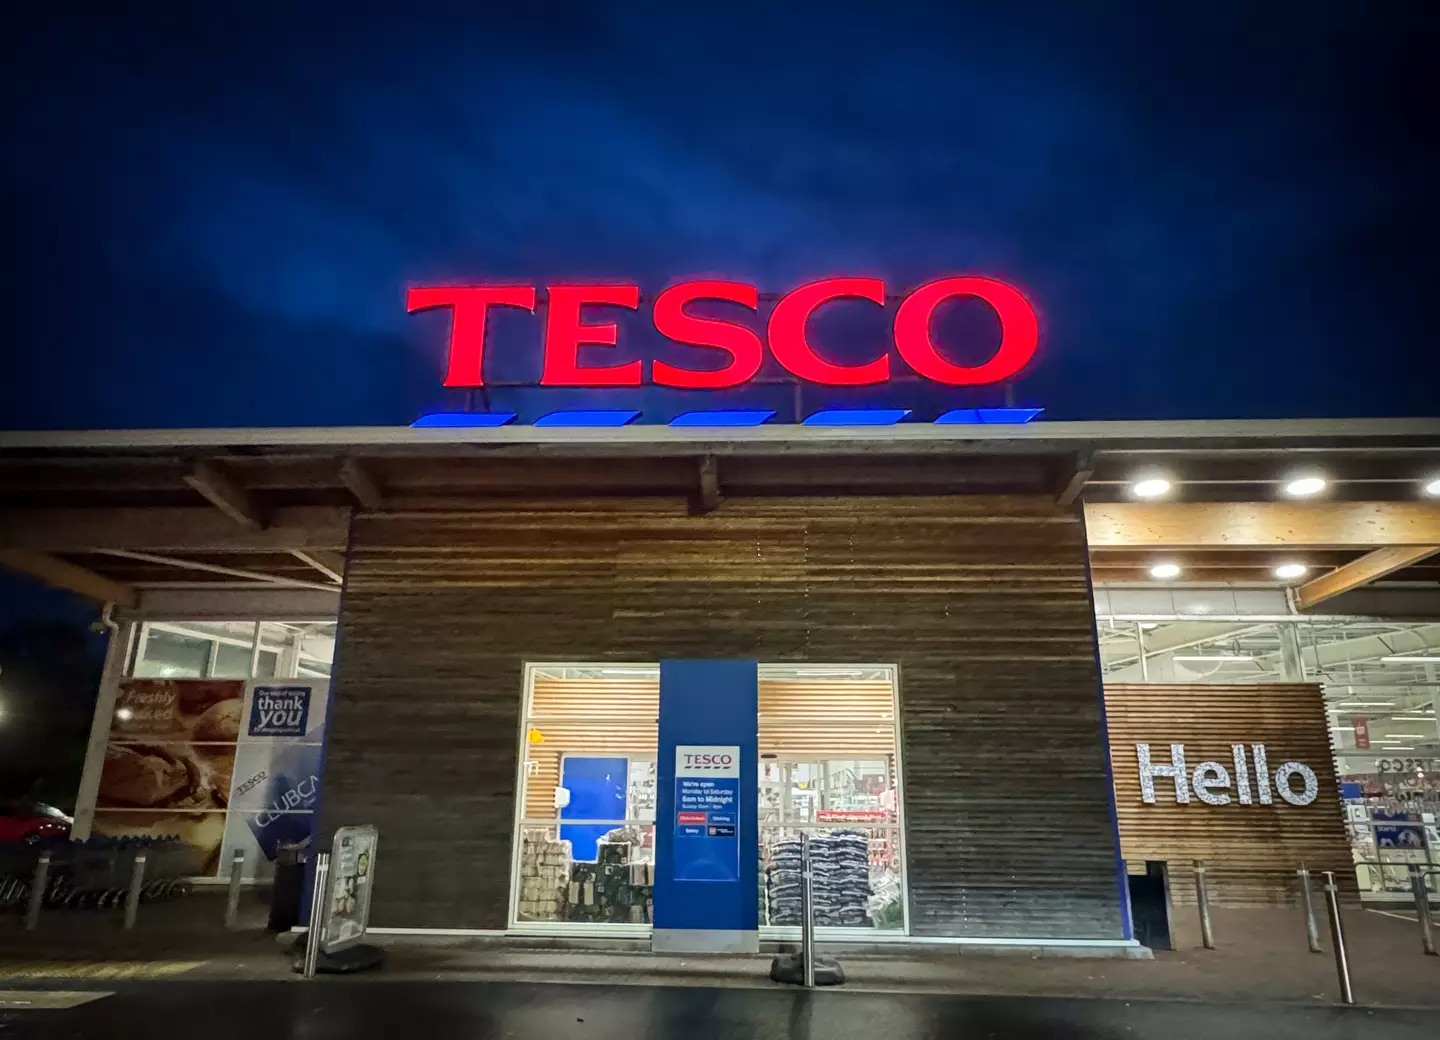 The Tesco worker allegedly shamed the mother for allowing her child to eat in the shop.